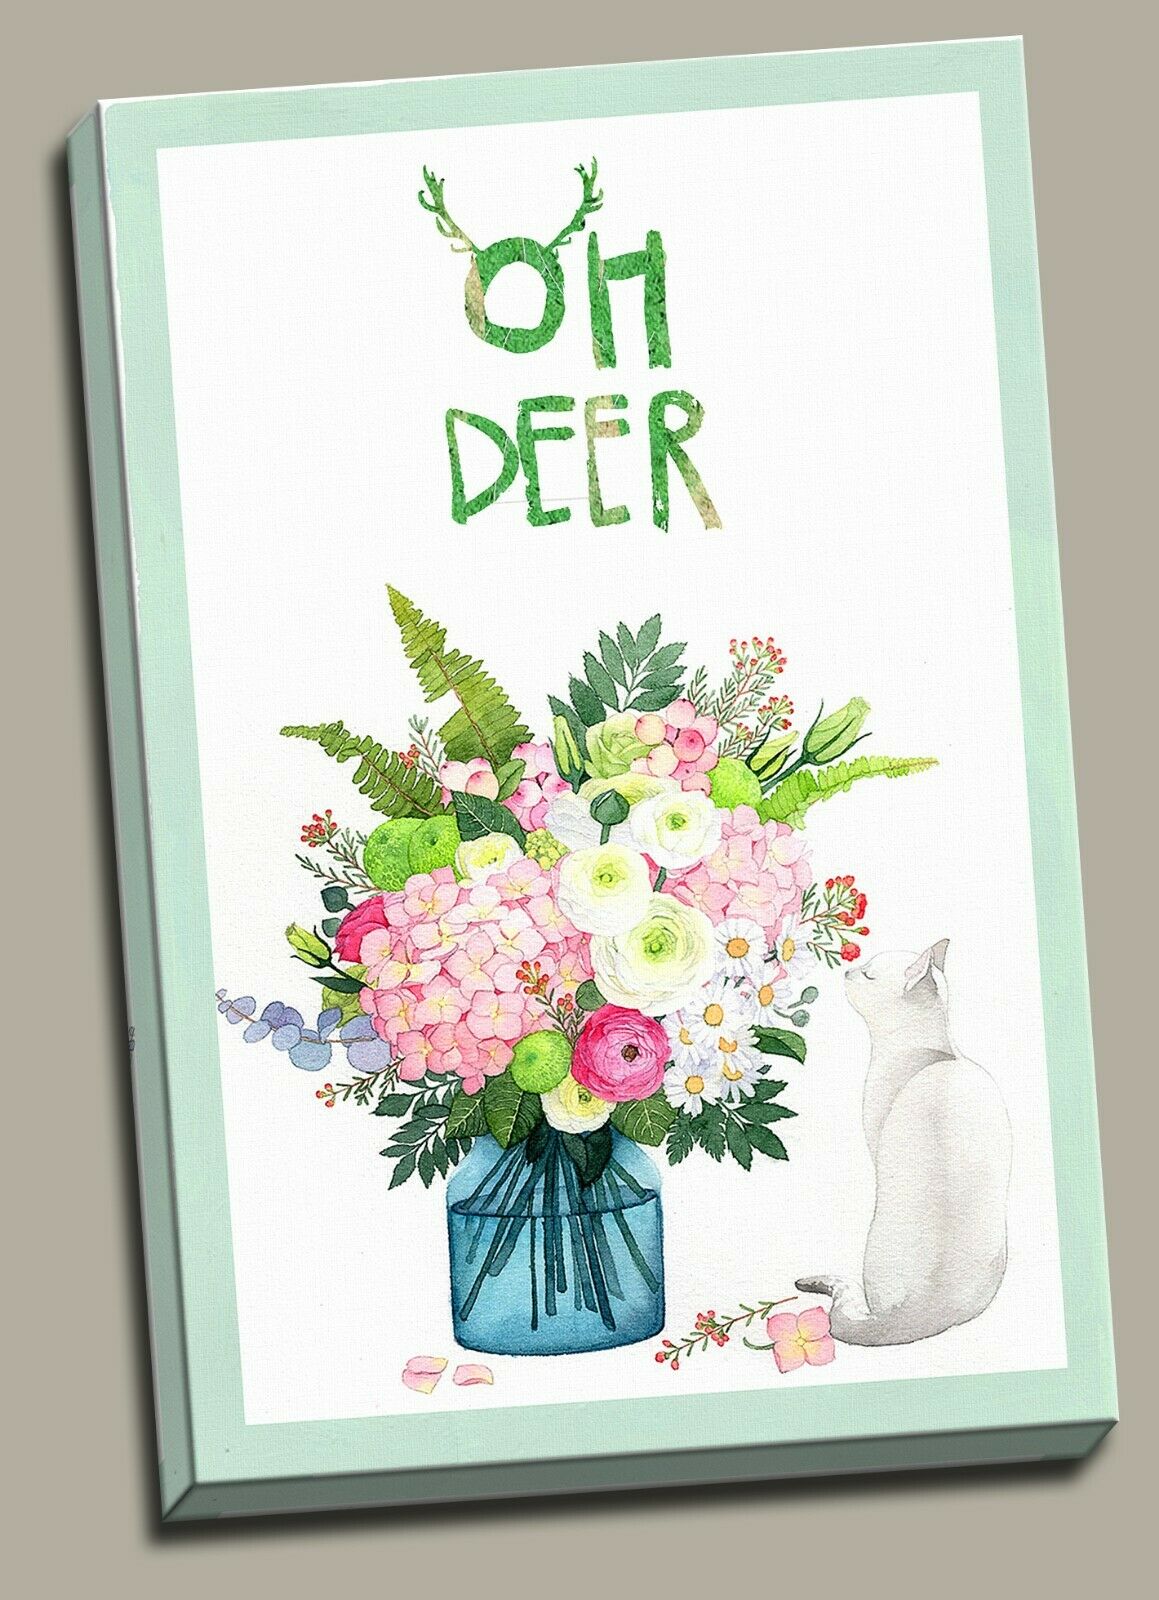 Oh Deer Young Wile Free Flowers Framed Canvas Print Abstract Wall Art Watercolor